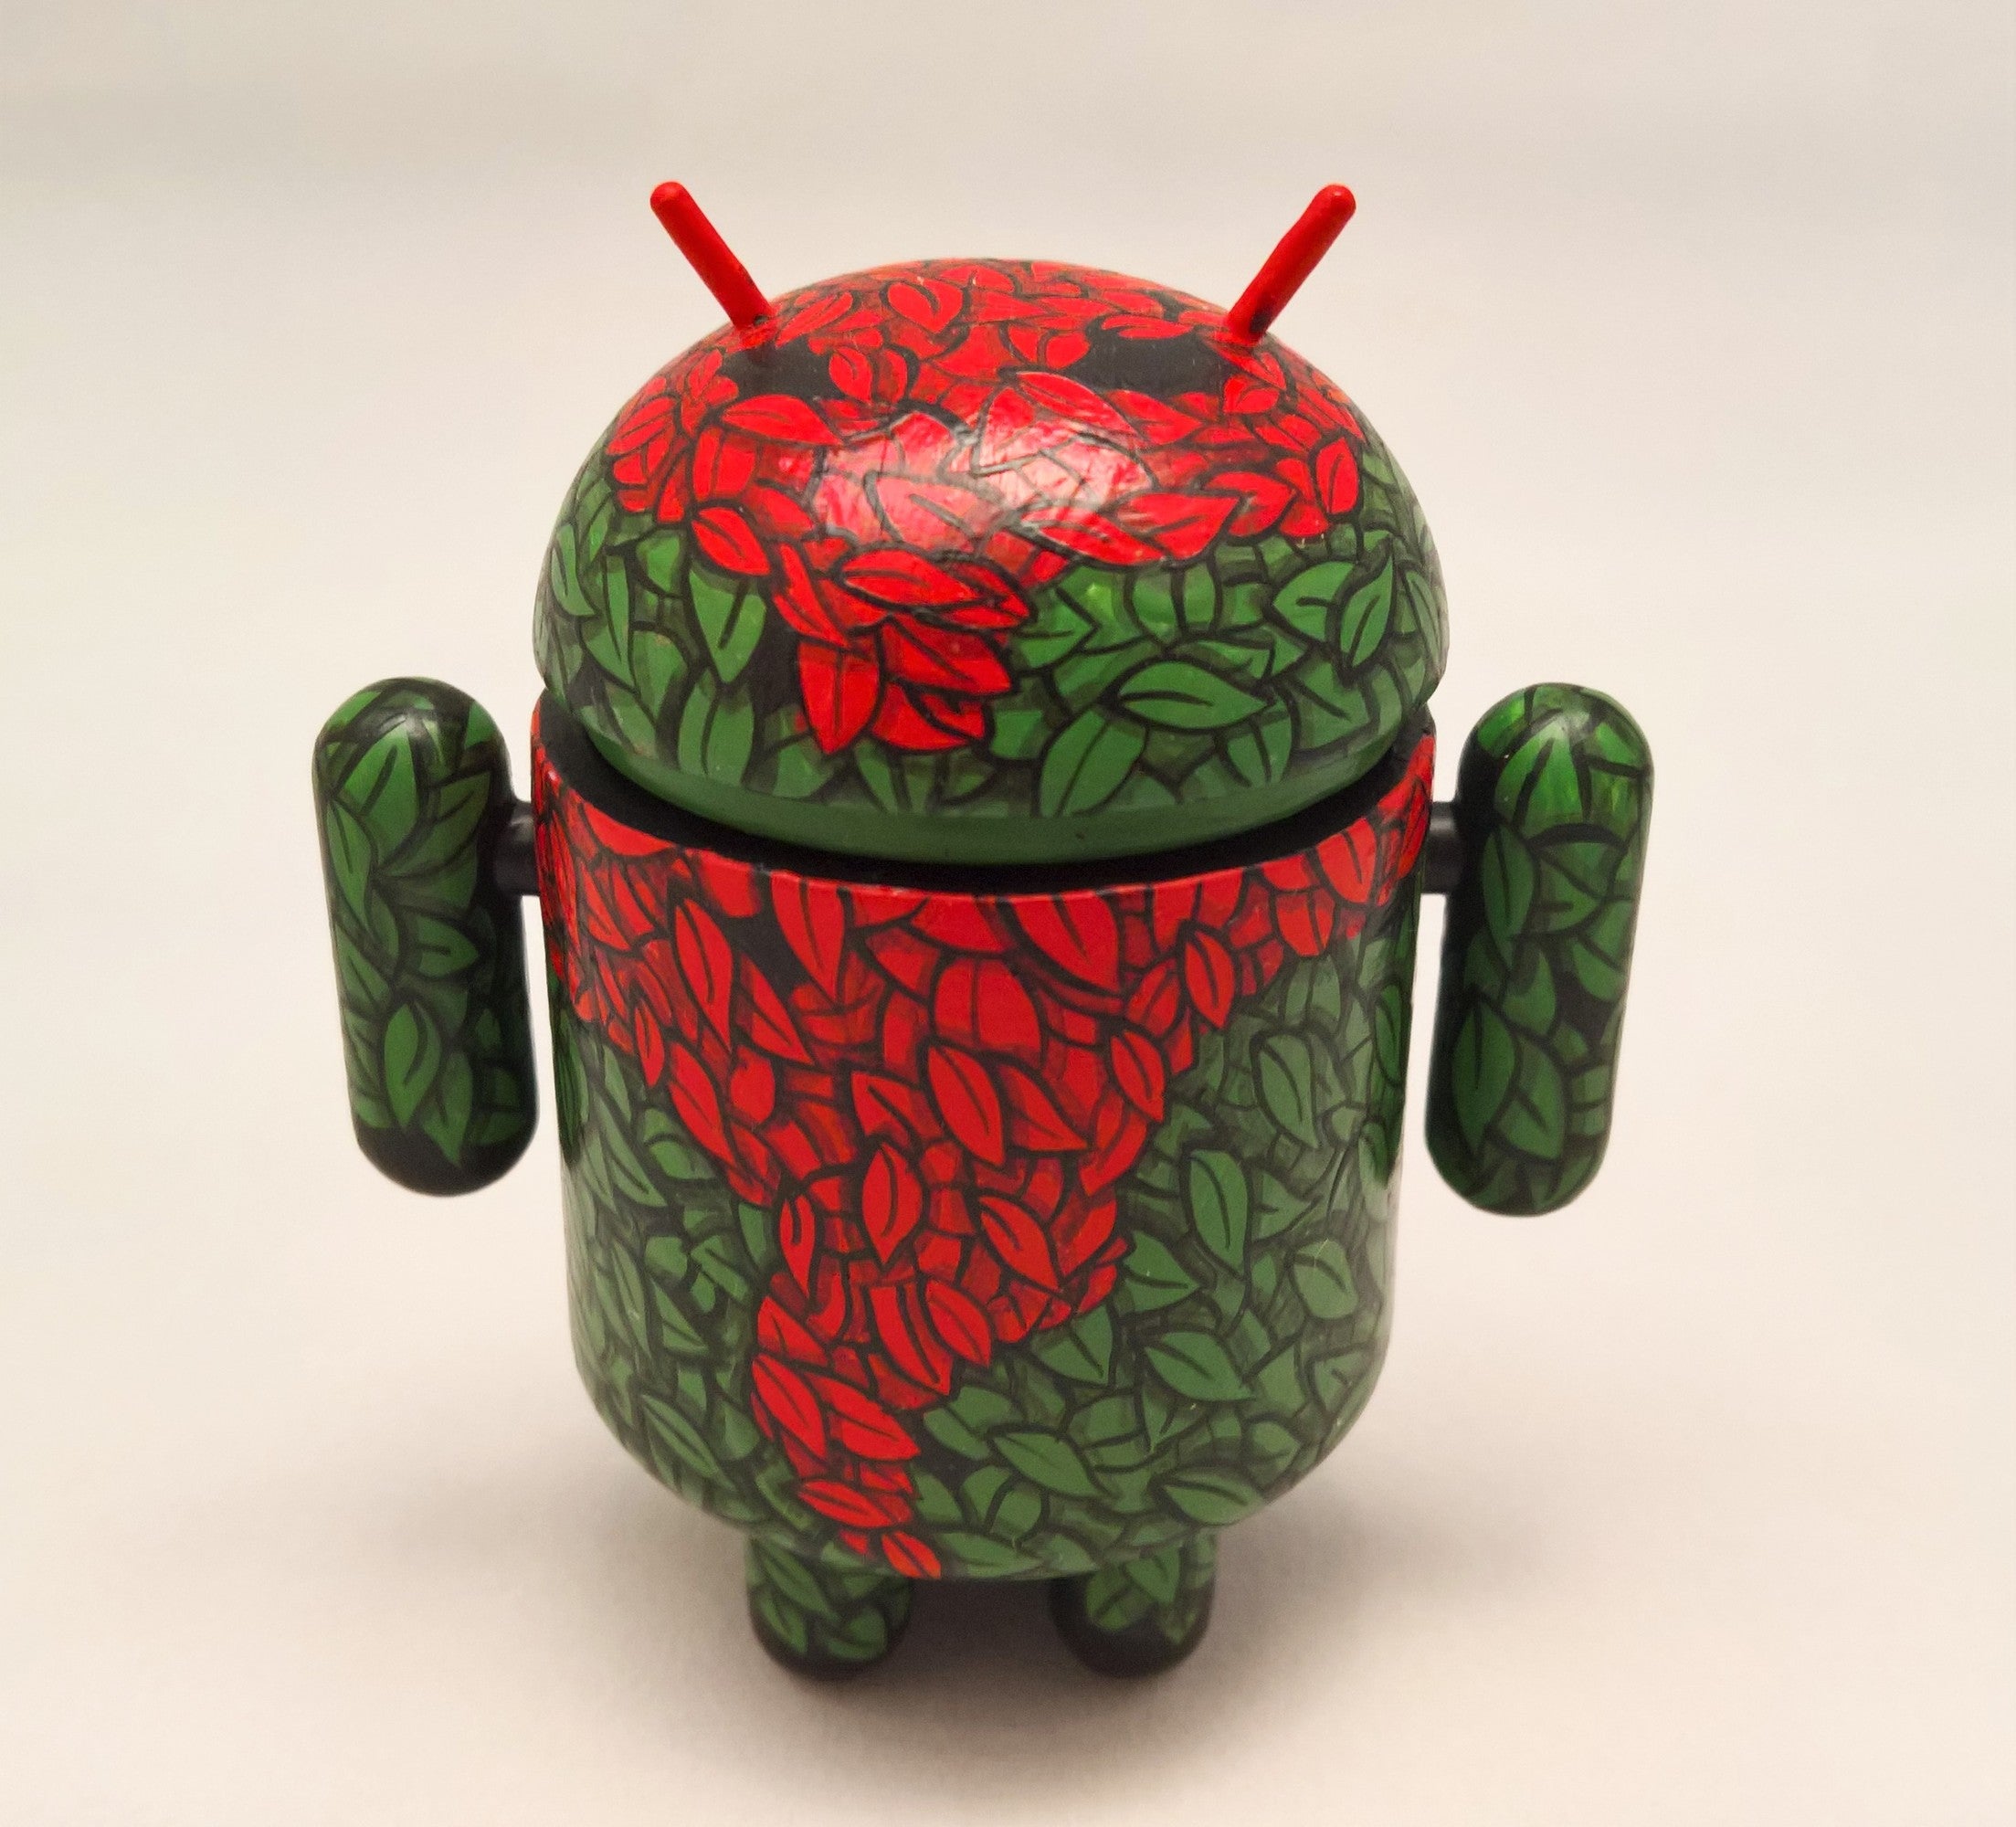 Custom Android by David Stevenson, a unique robot with leaf and flower designs.